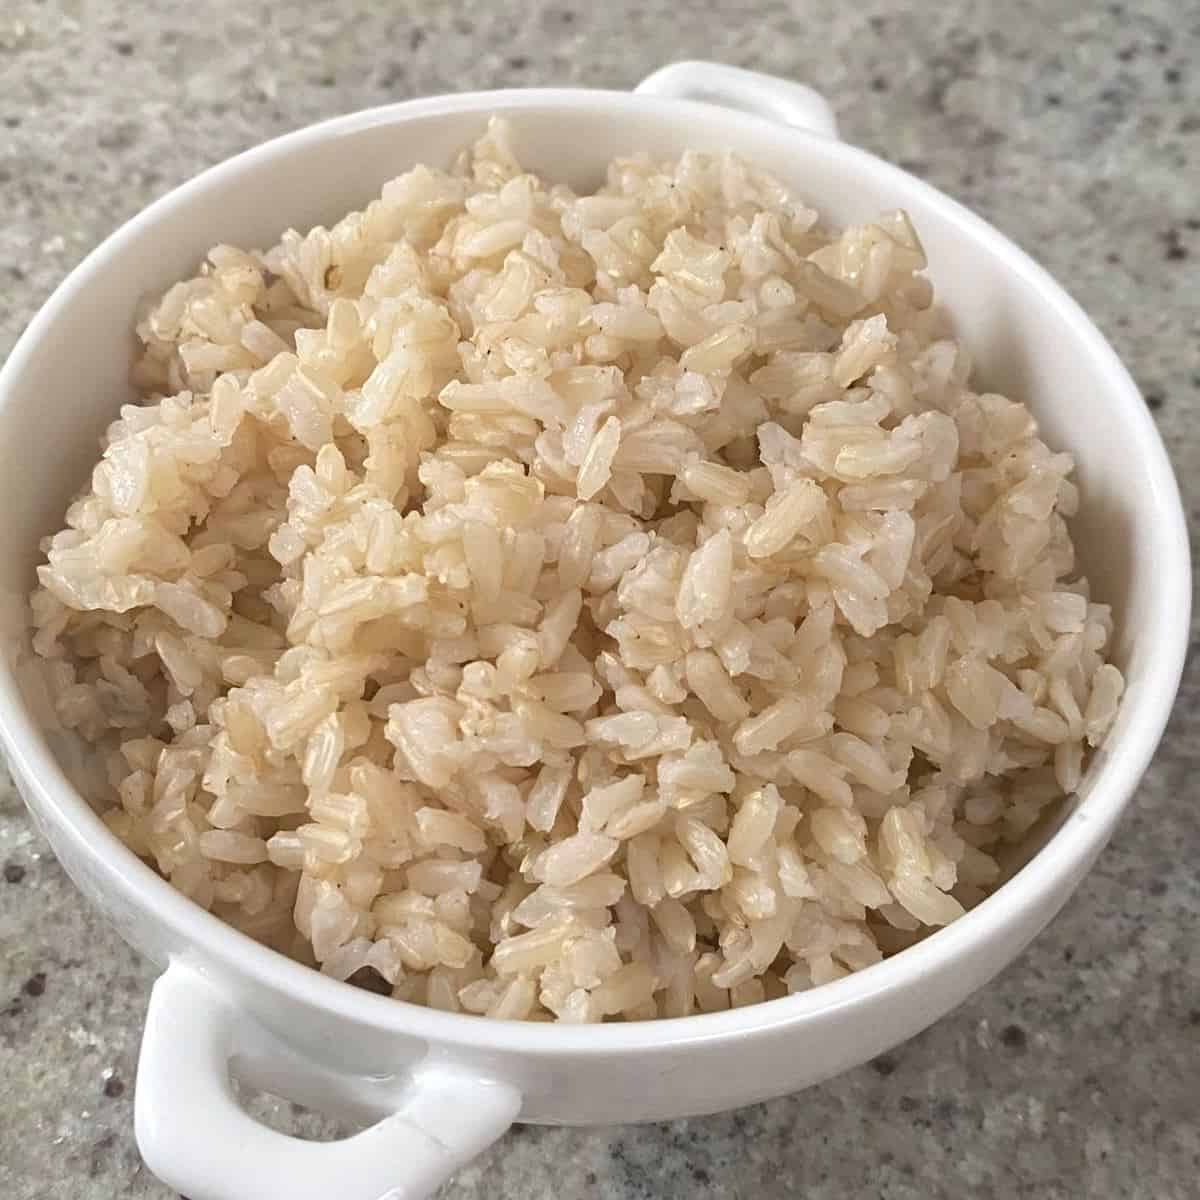 How To Cook Brown Rice Perfectly Every Time - Alphafoodie